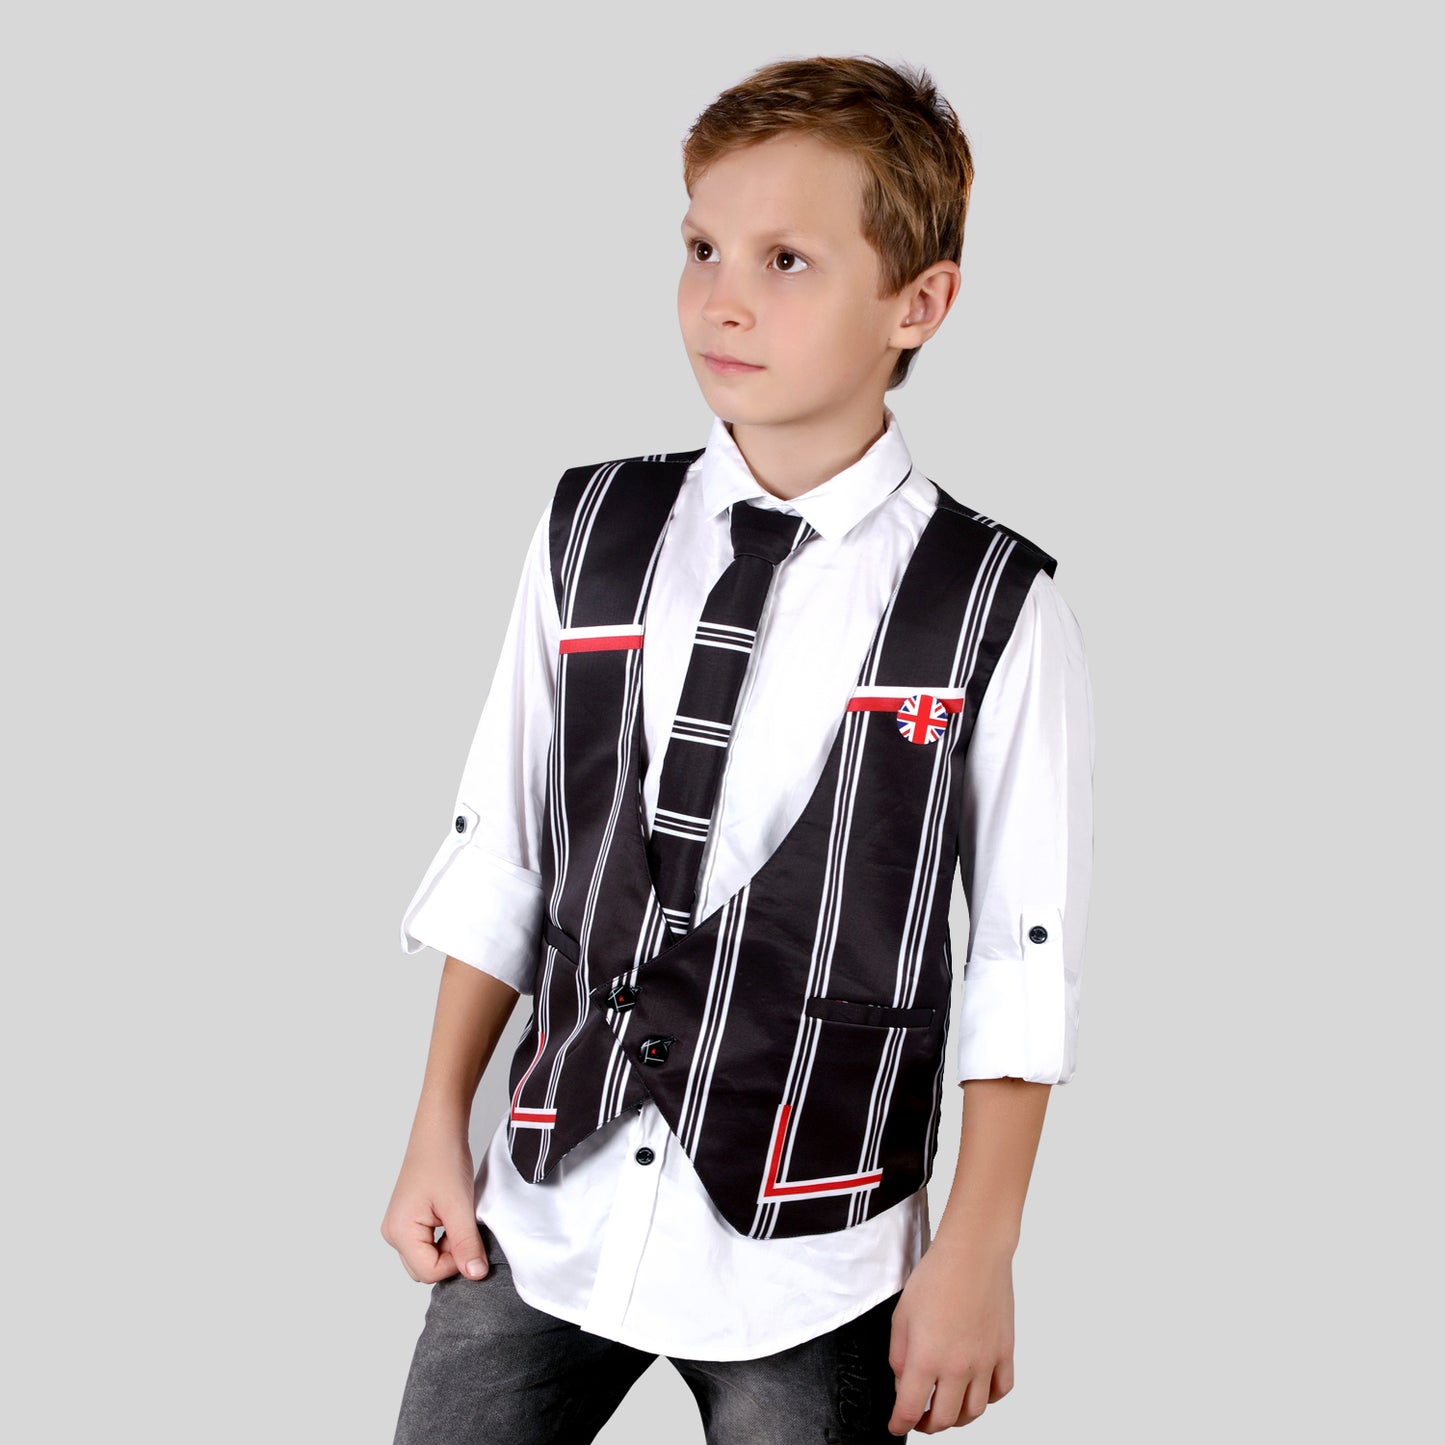 Stylish and fashionable party shirt with waistcoat and a tie